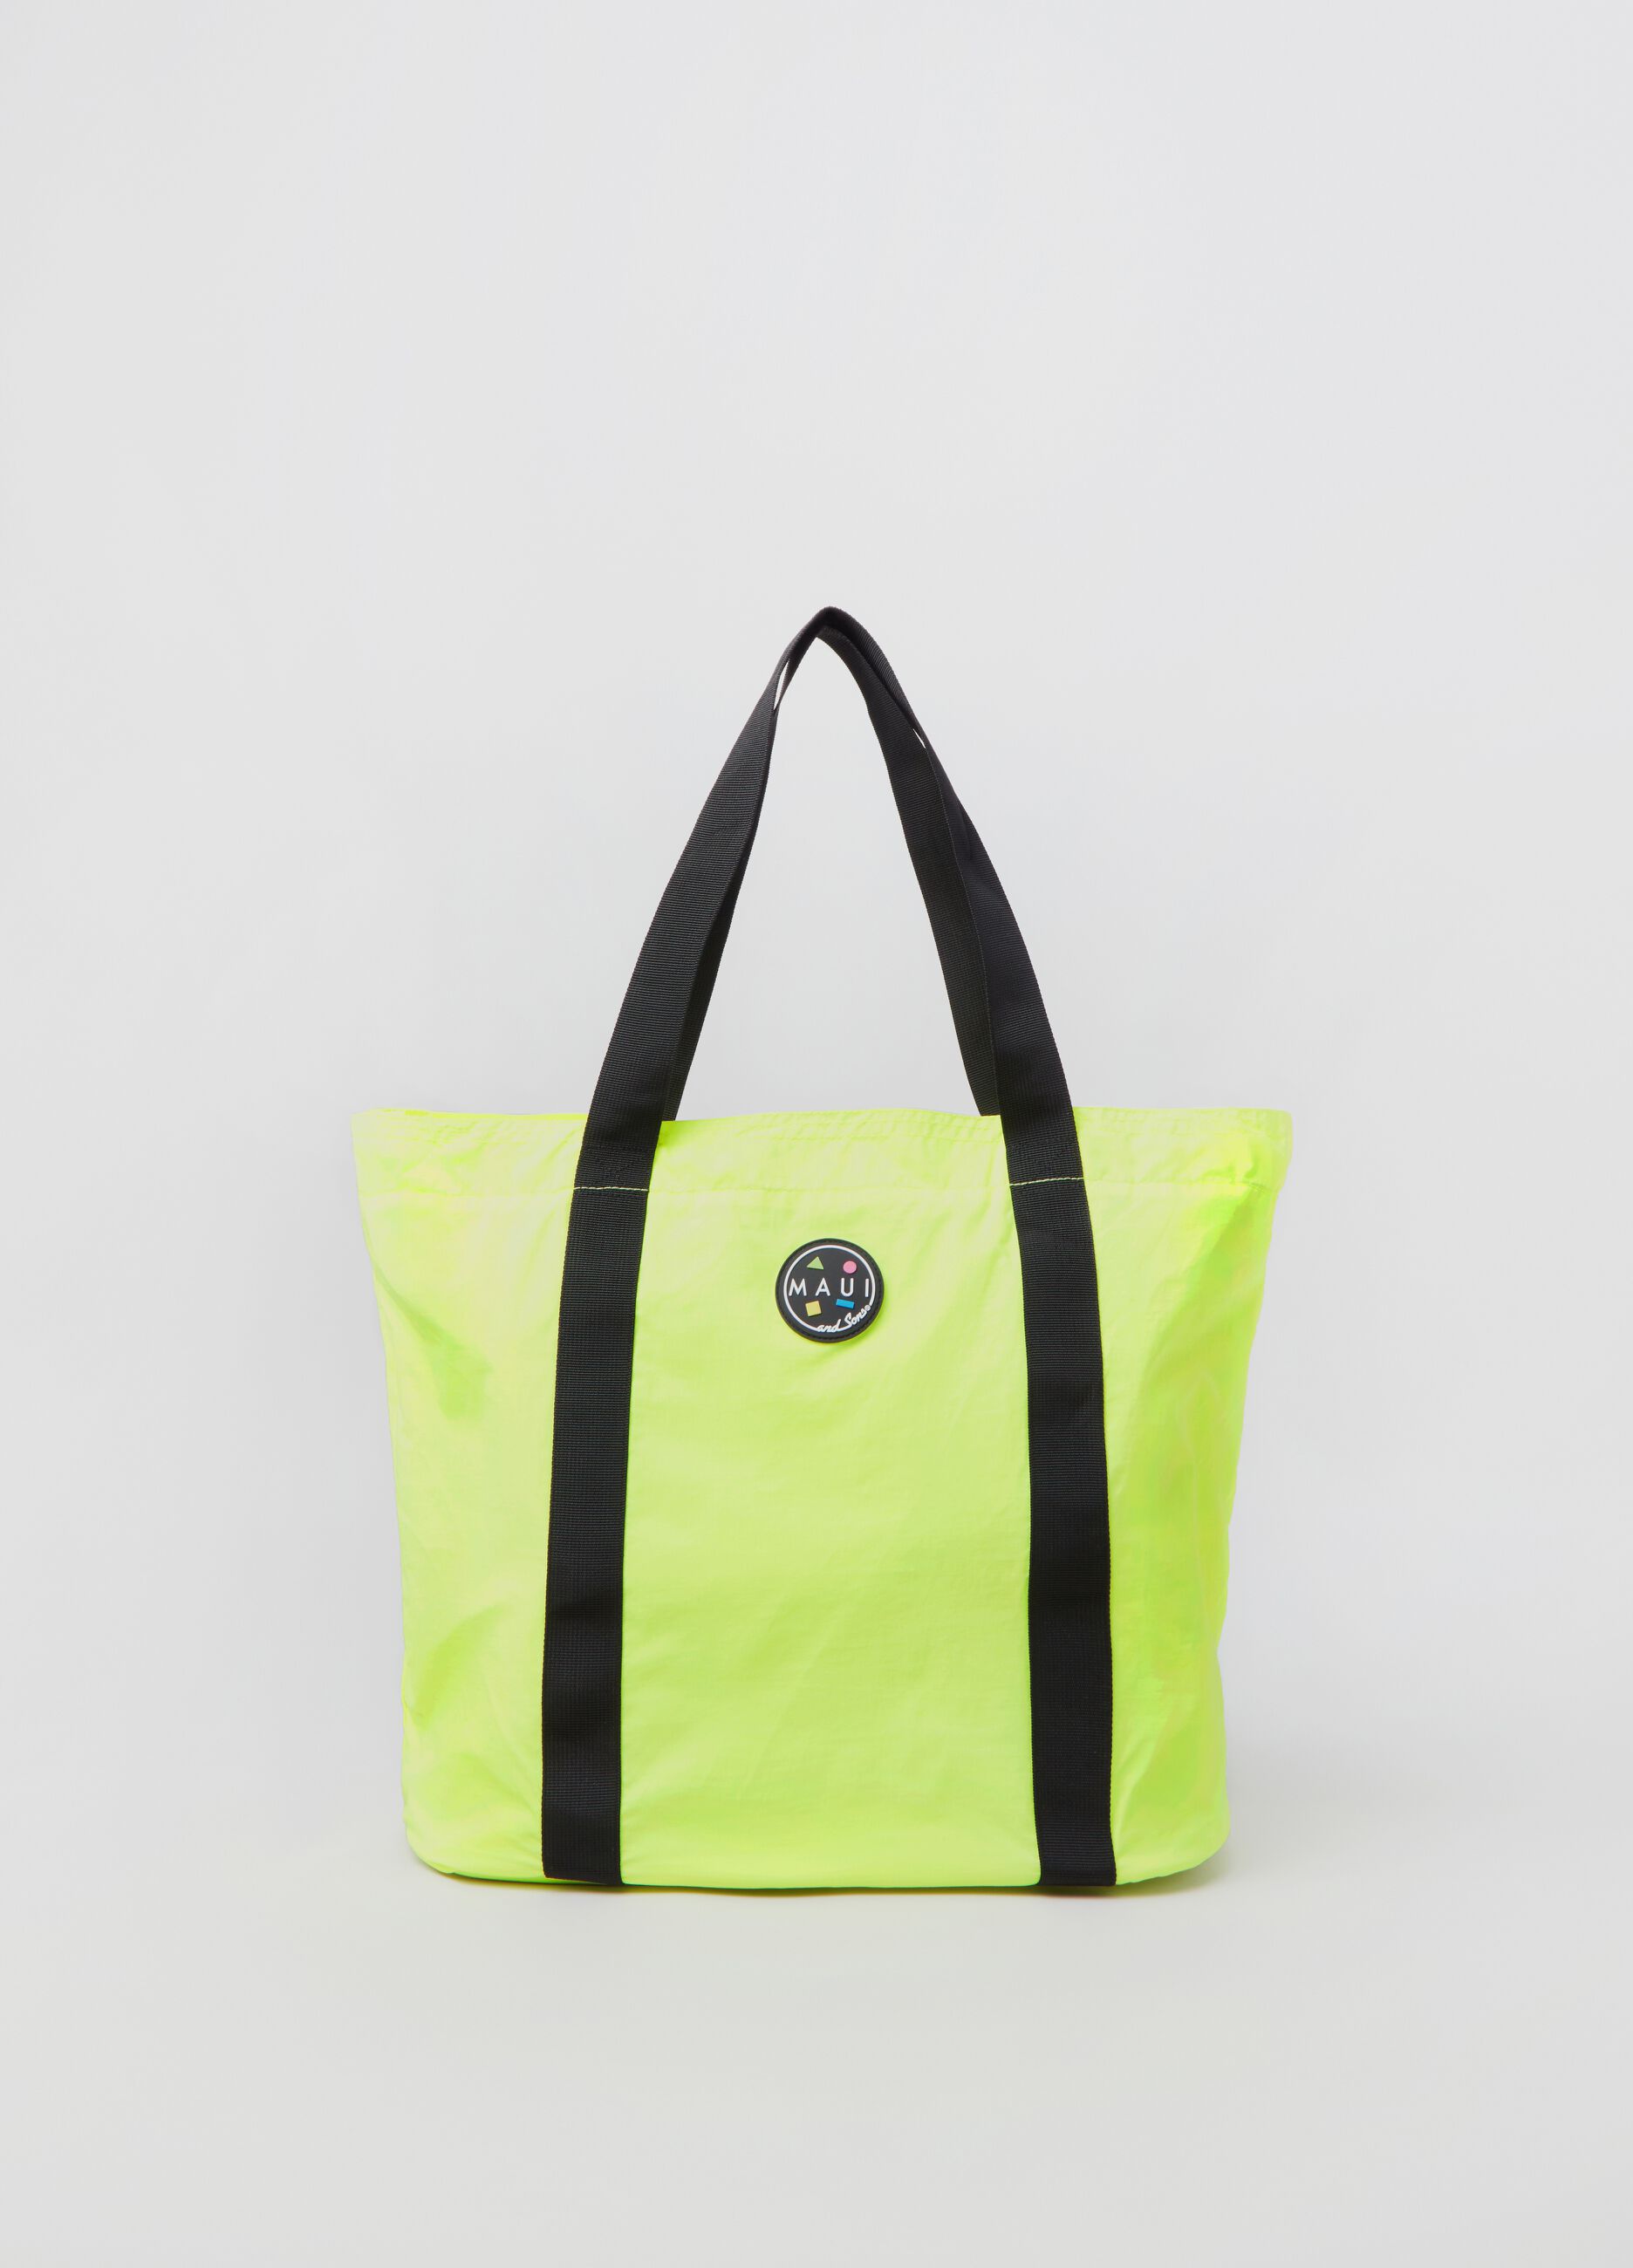 Shopping bag by Maui and Sons